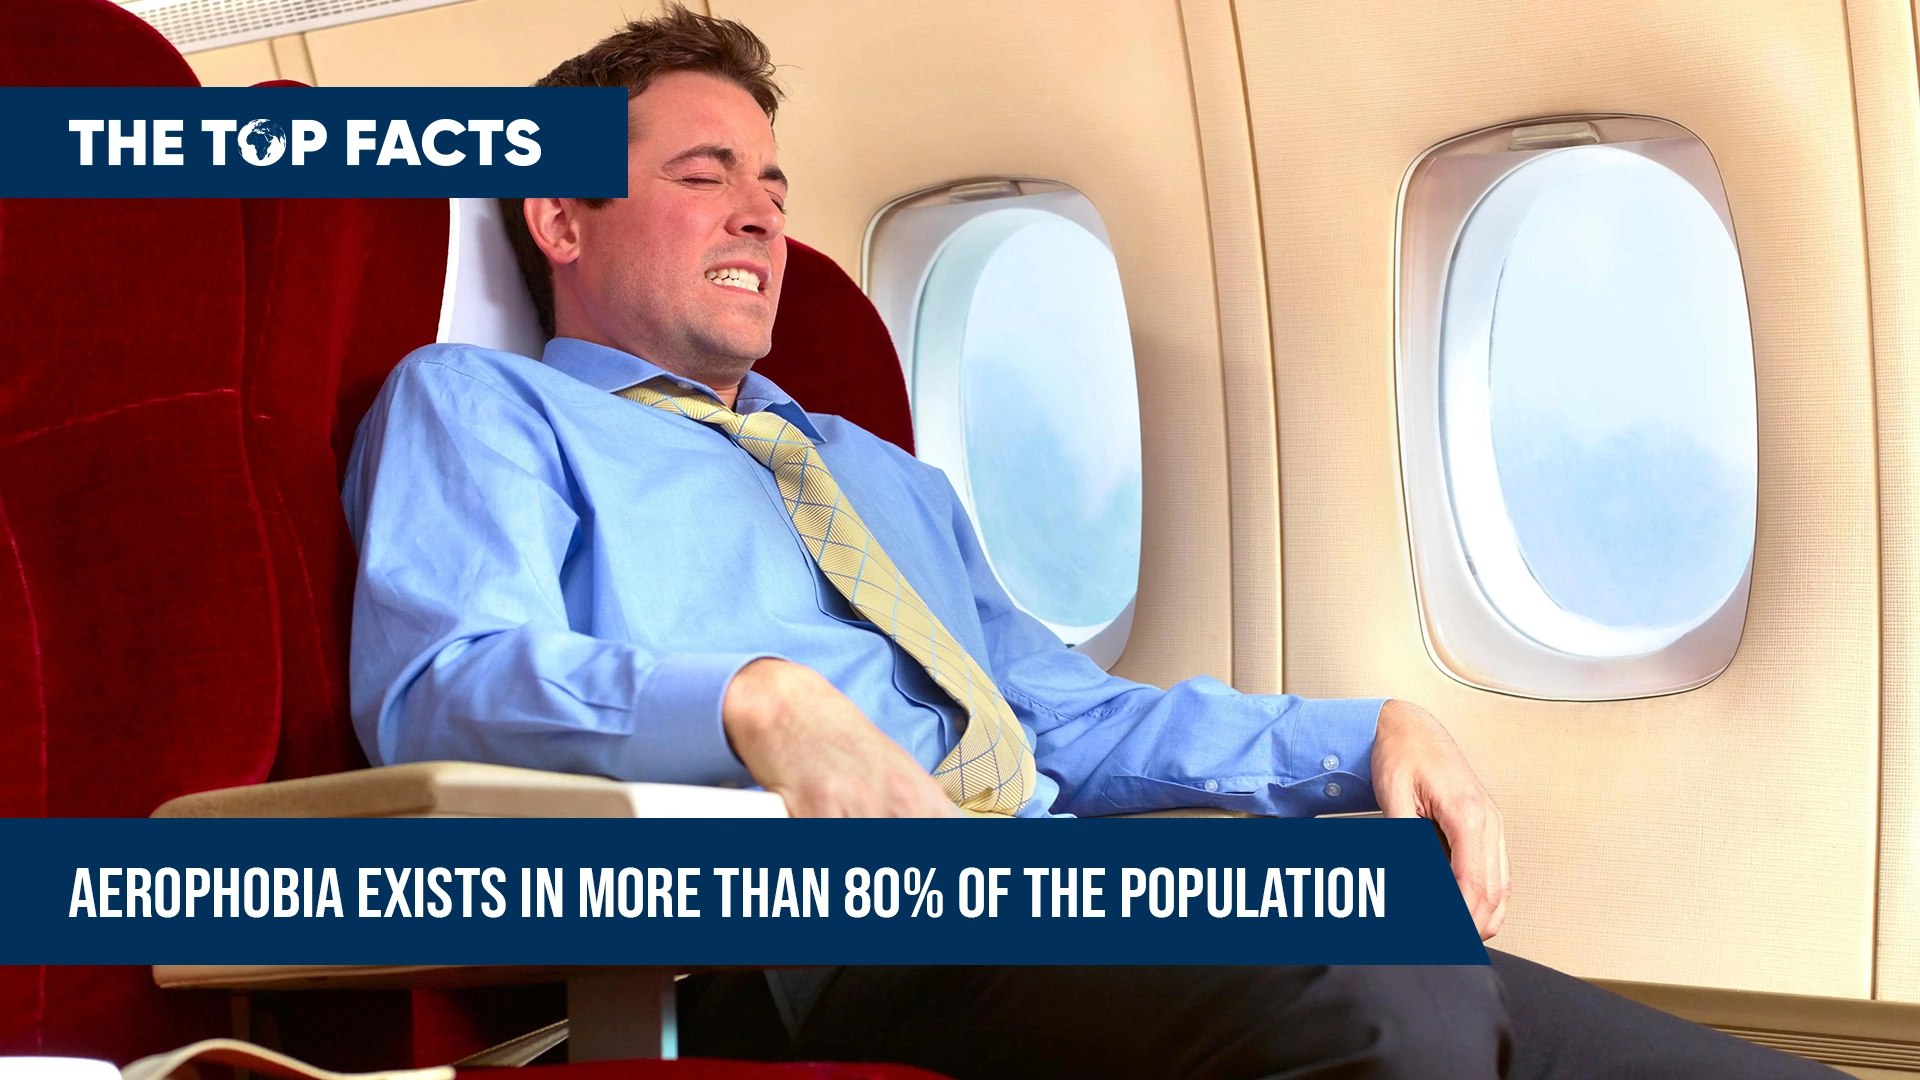 Aerophobia exists in more than 80% of the population